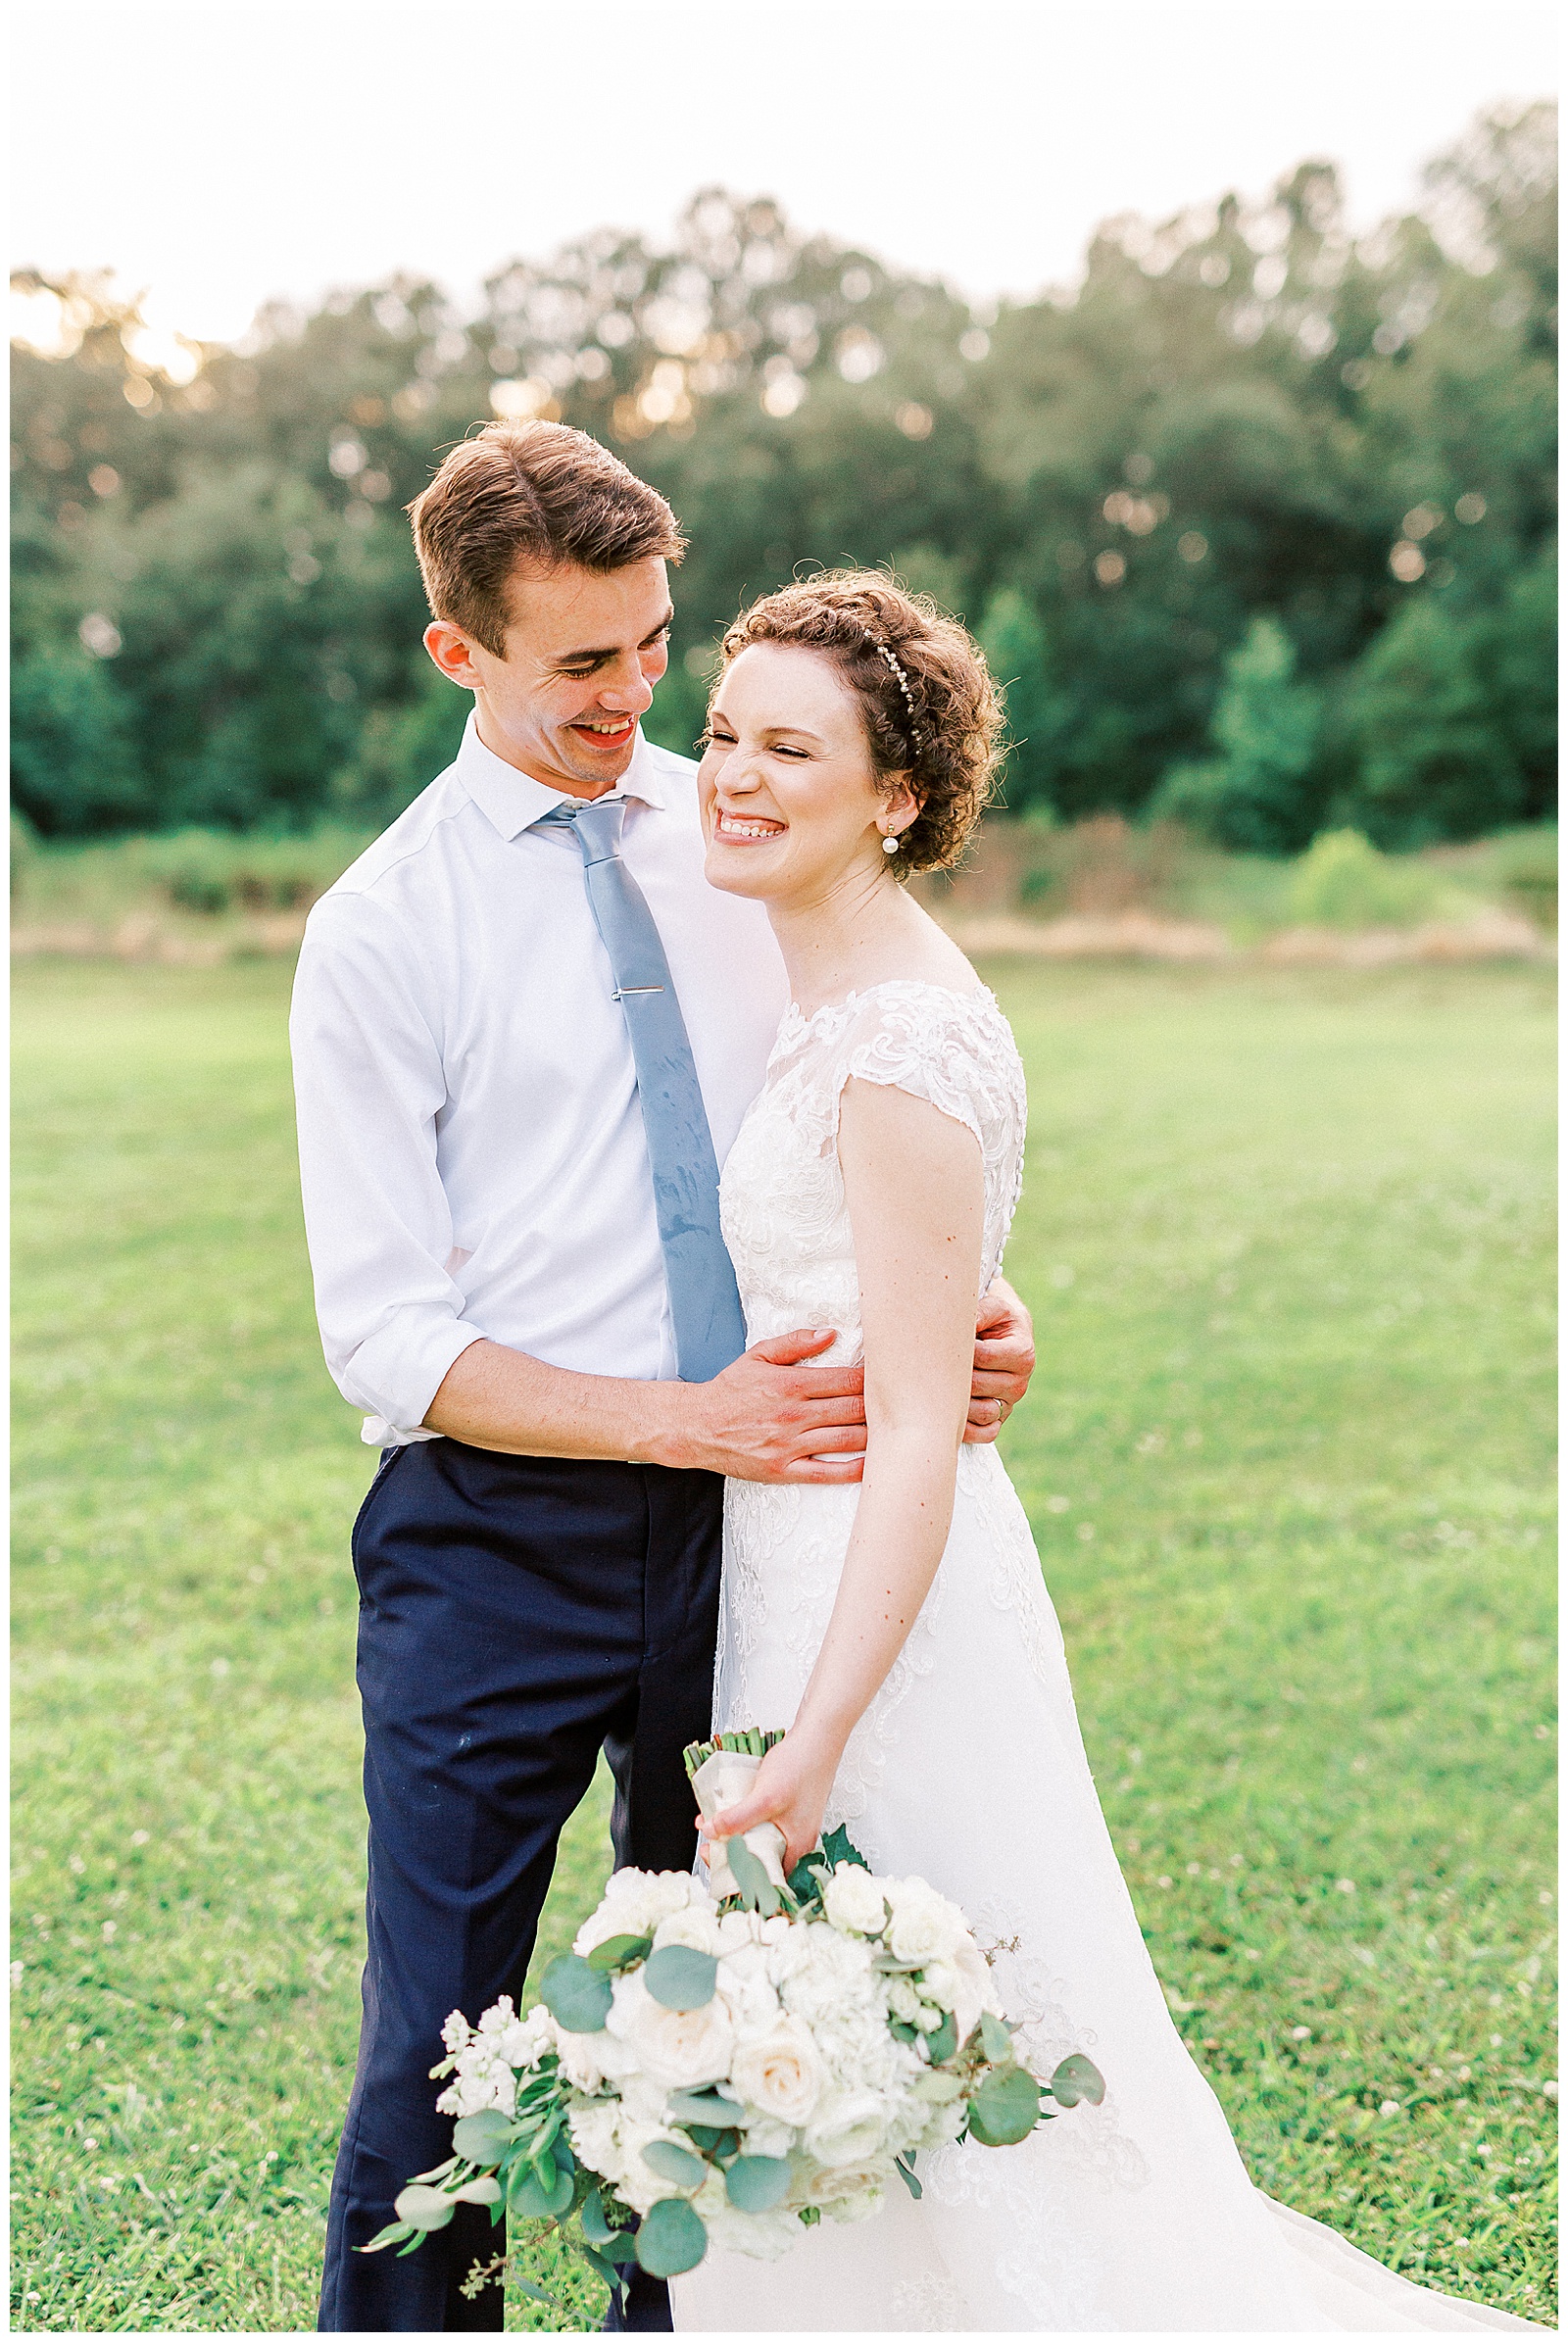 summer sunset in field wedding day bride groom portraits with curly short haired bride with lace wedding dress and navy blue suit groom